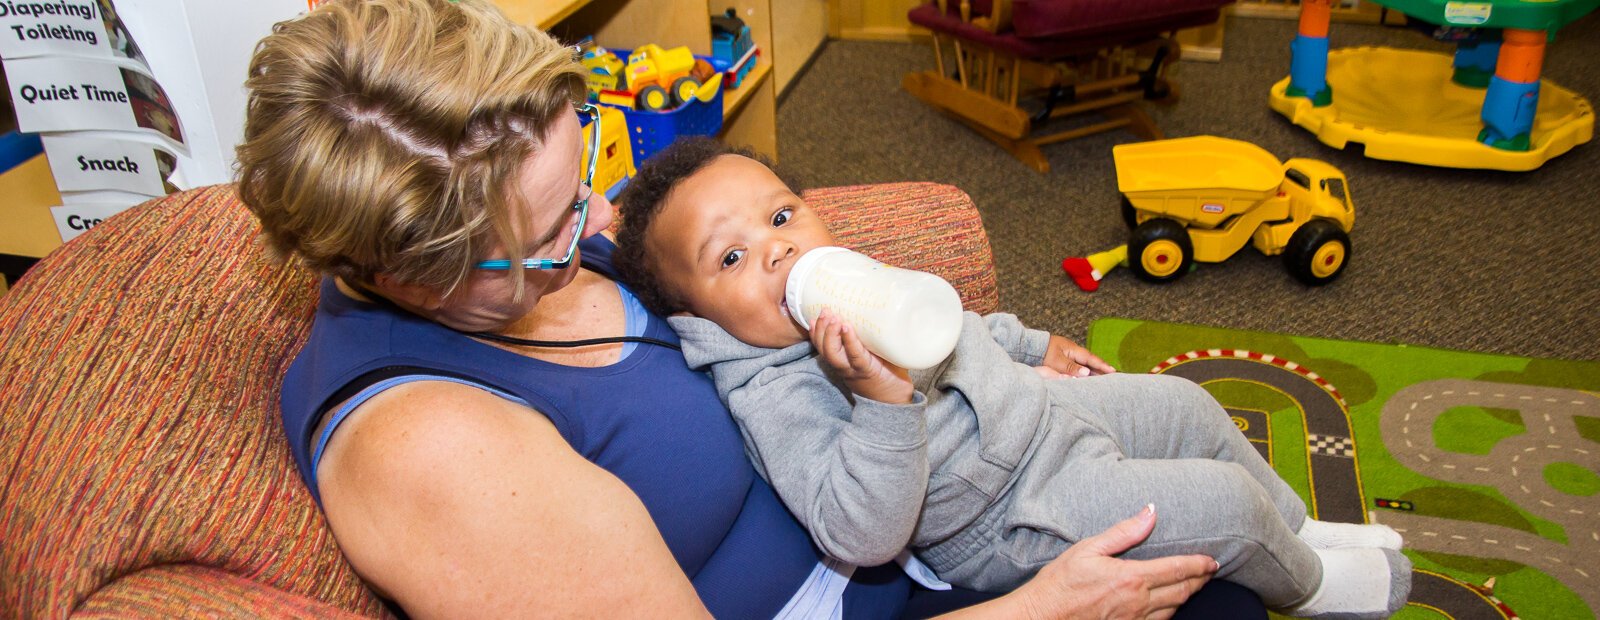 Volunteer Linda Thompson with a child at the Kalamazoo Drop-In Child Care Center.